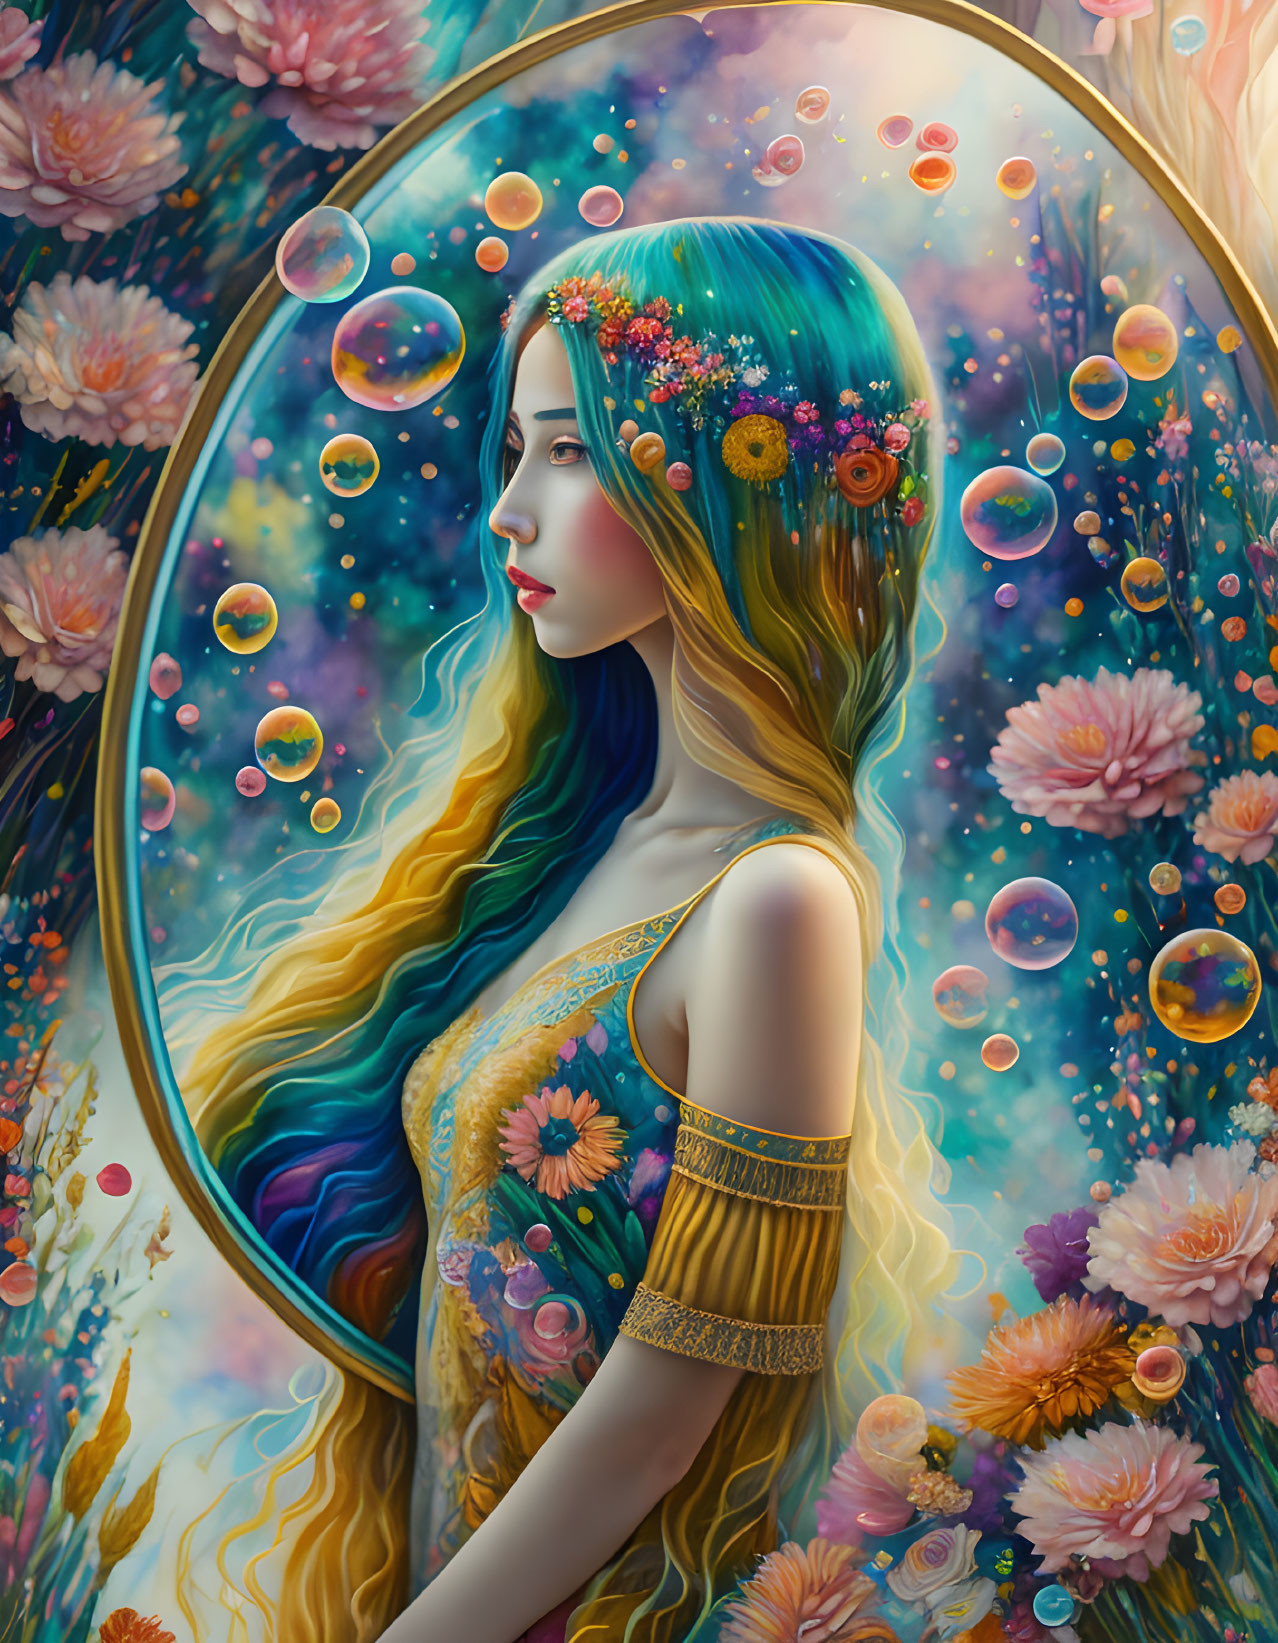 Woman with Blue and Gold Hair Surrounded by Flowers and Bubbles on Floral Background